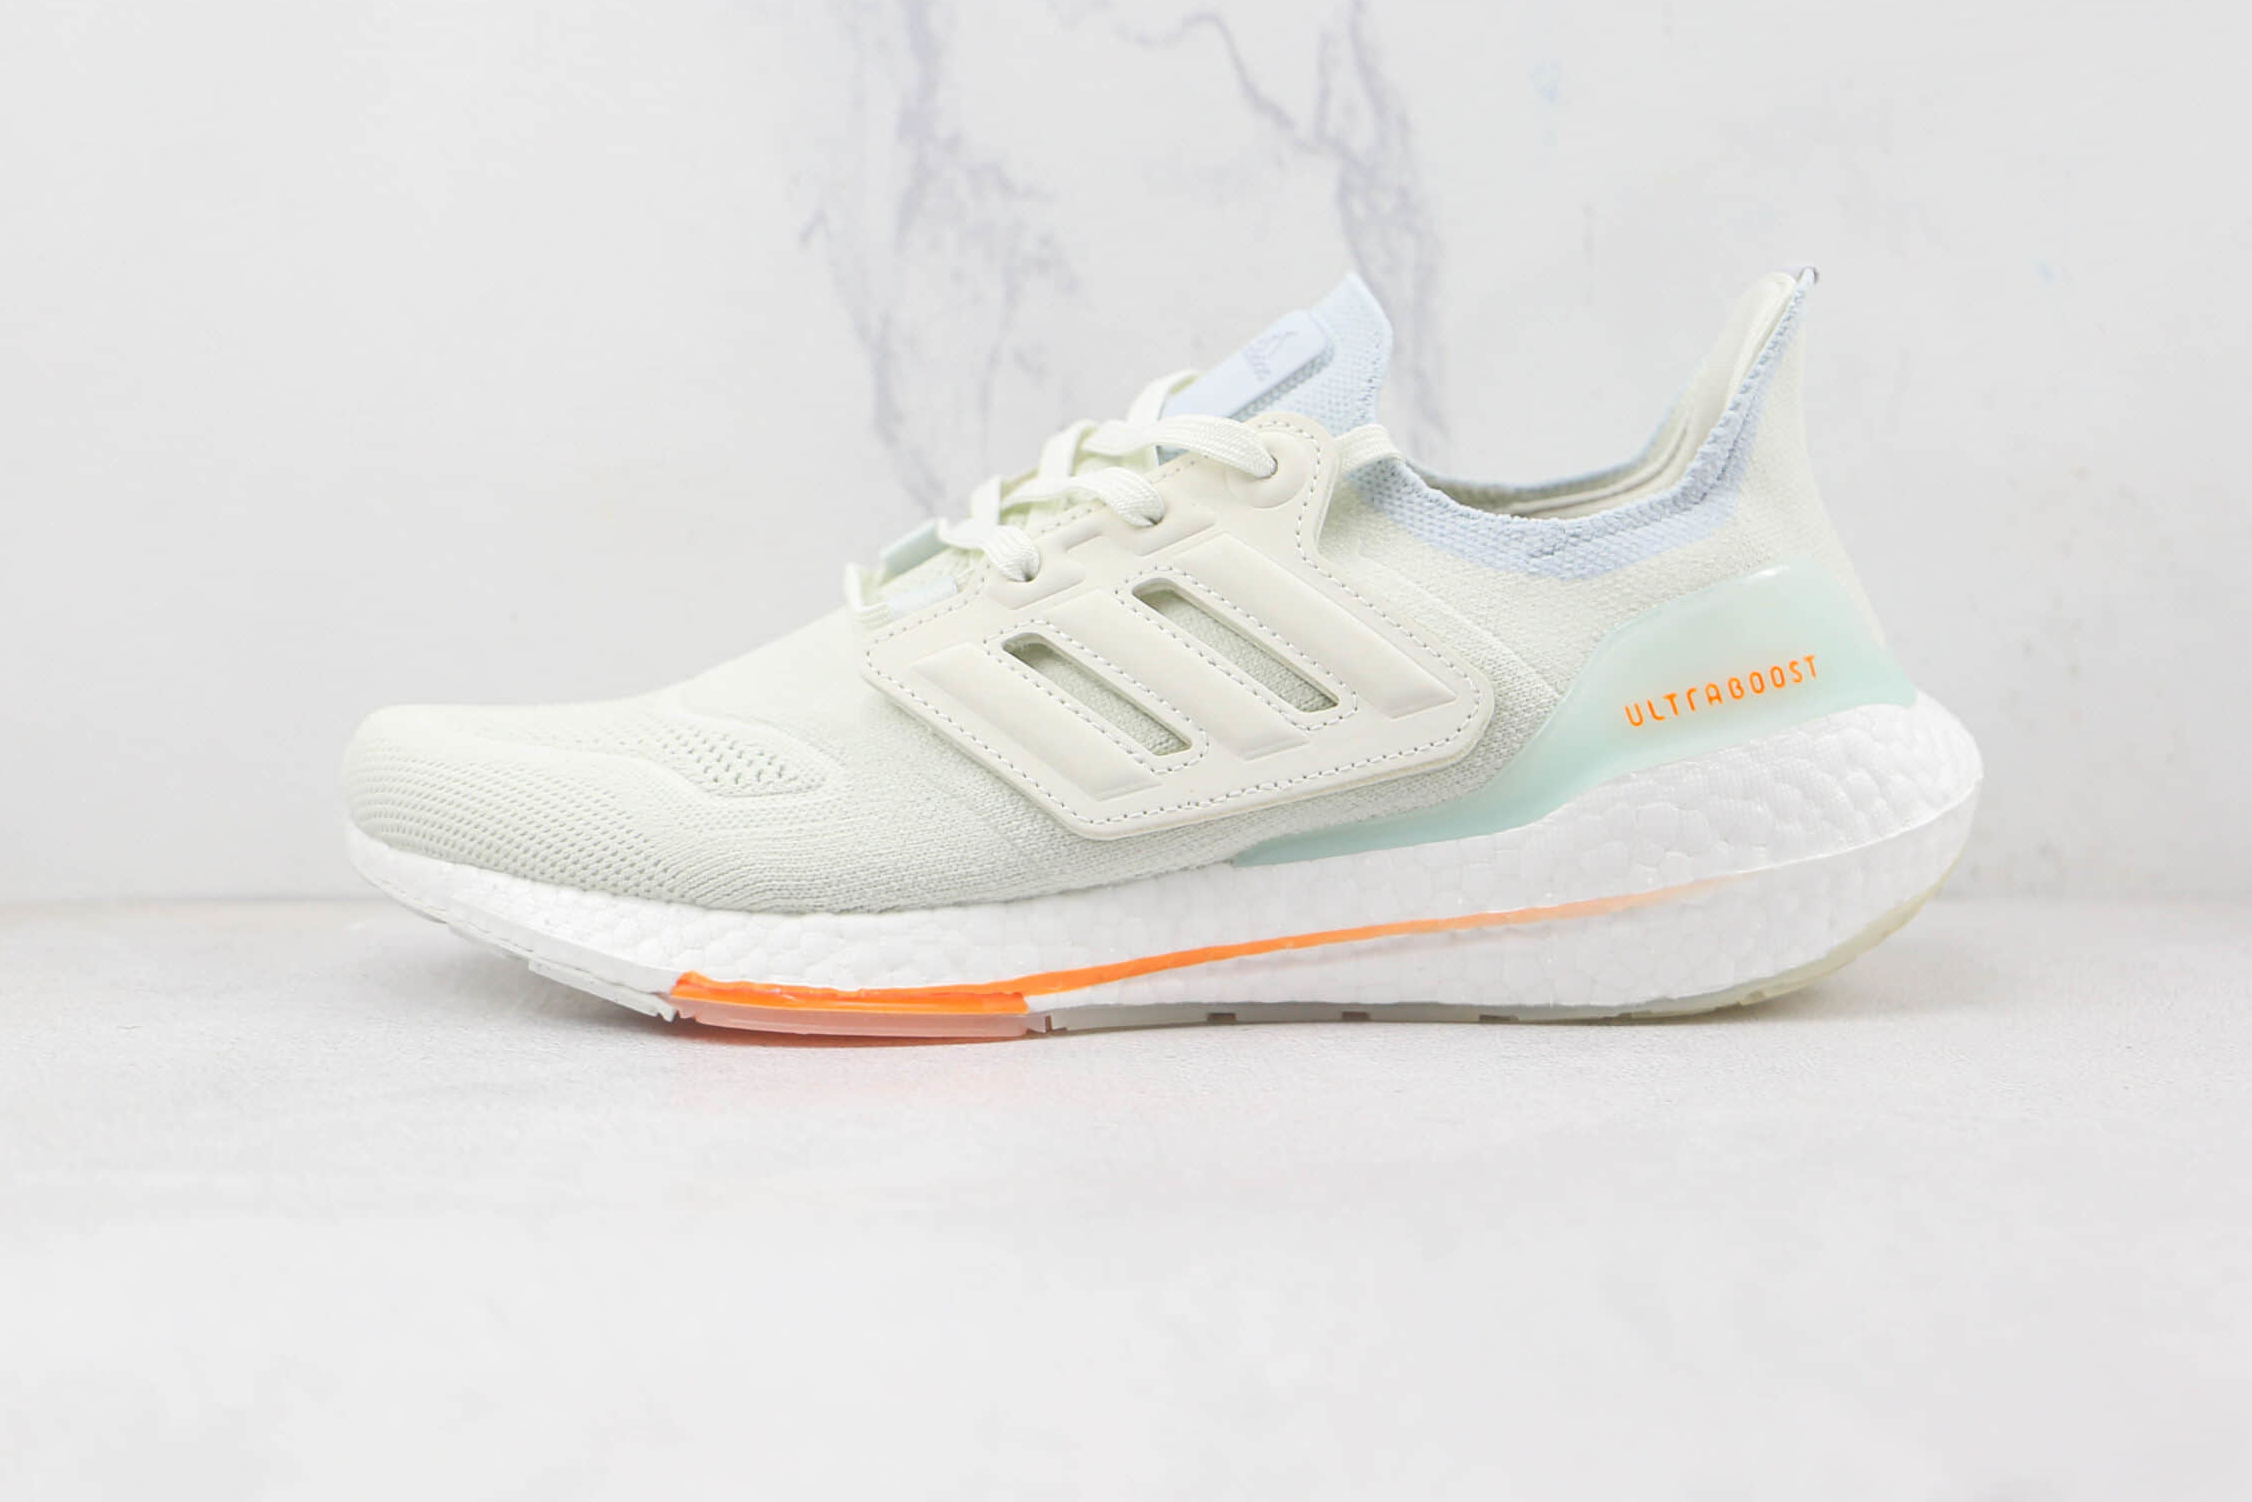 Adidas UltraBoost 22 'White Blue Tint' GY6227 - Boost Your Performance